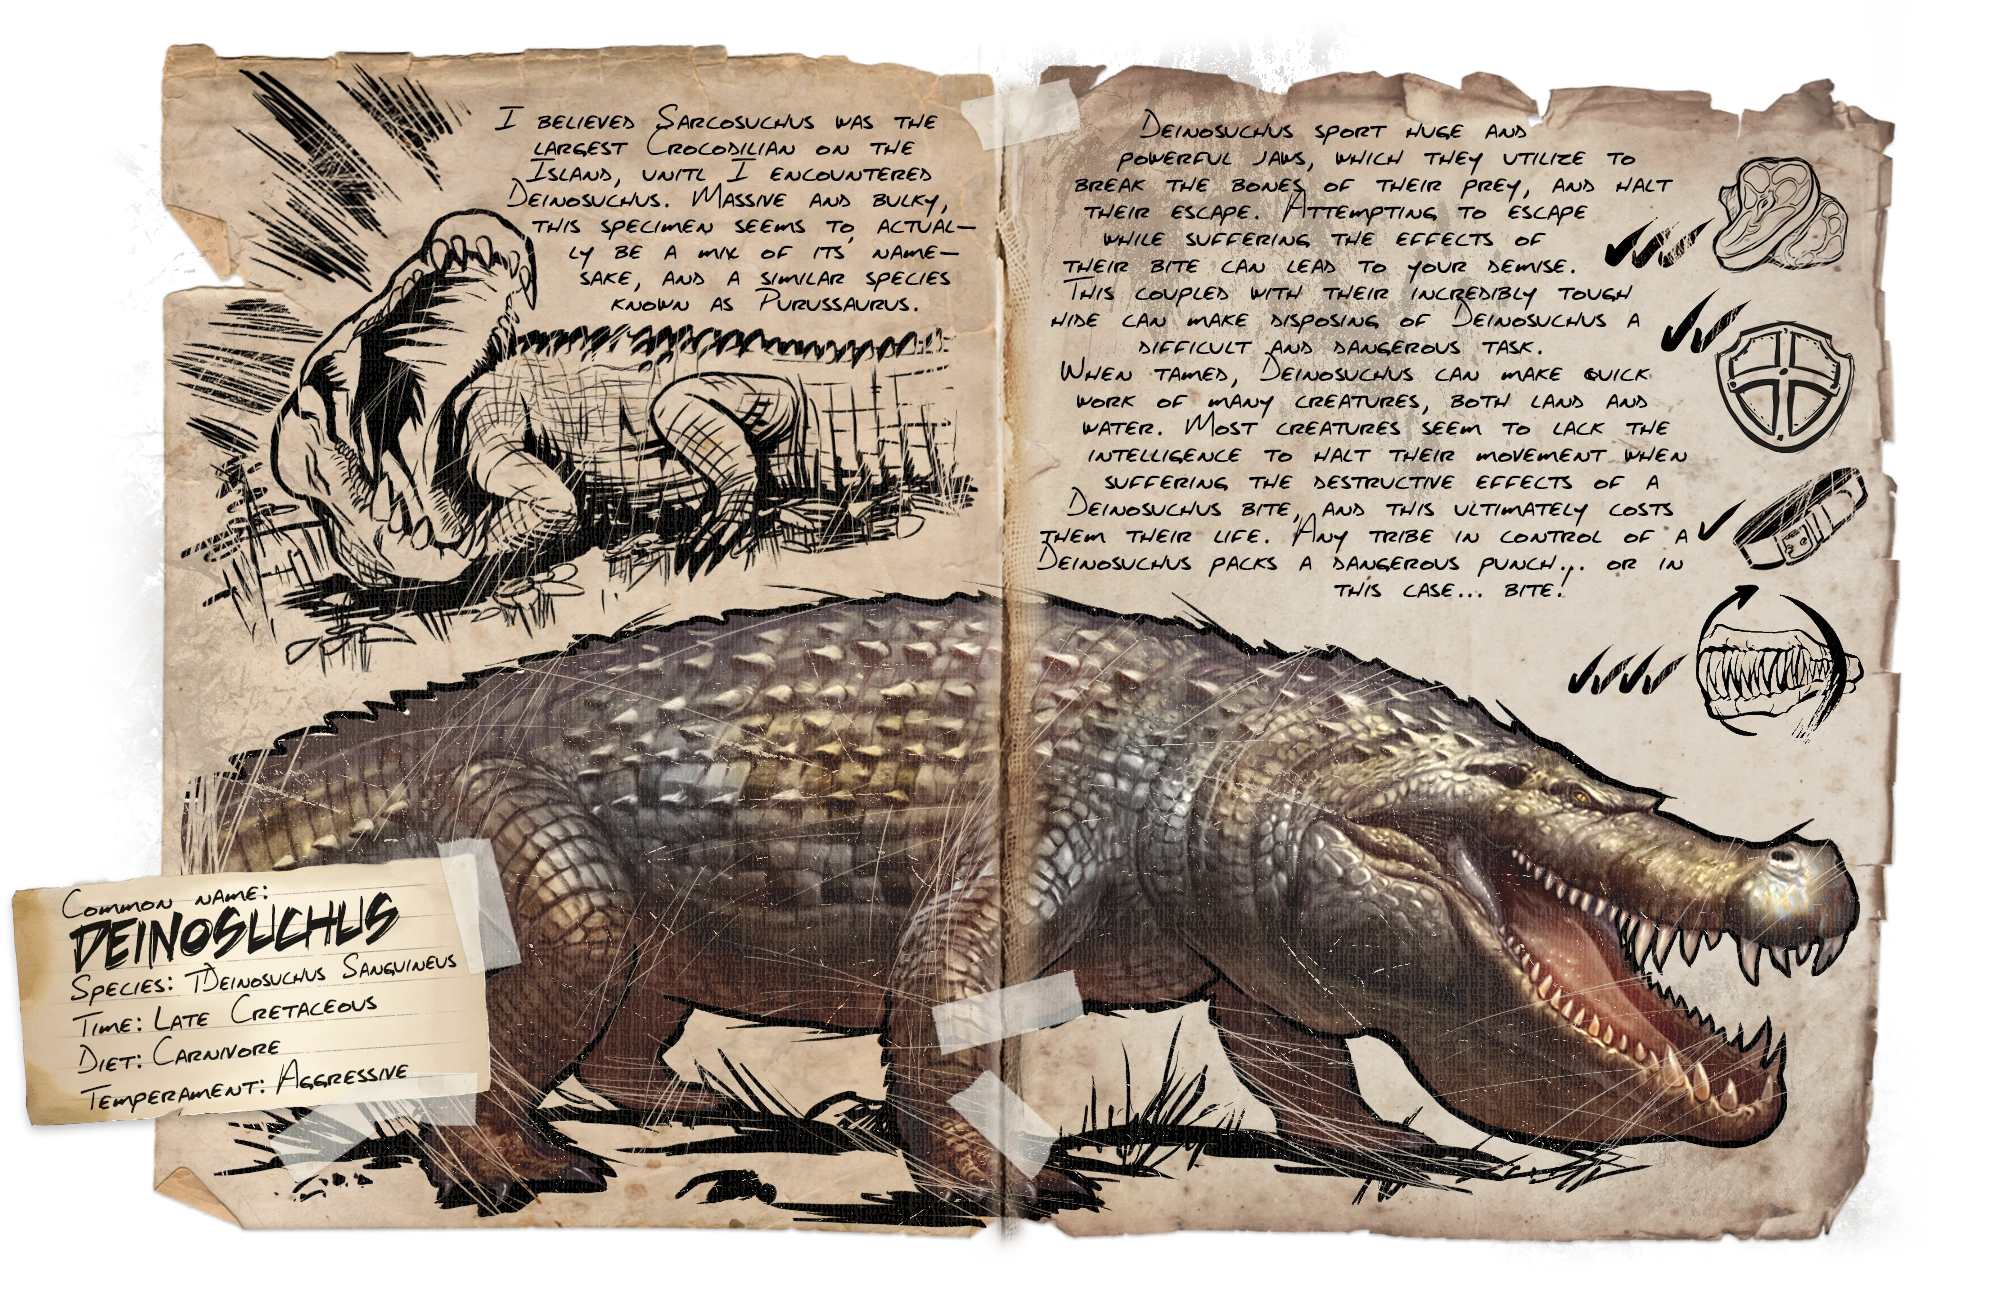 Hail to the cult of Deinosuchus - Creature submission archive